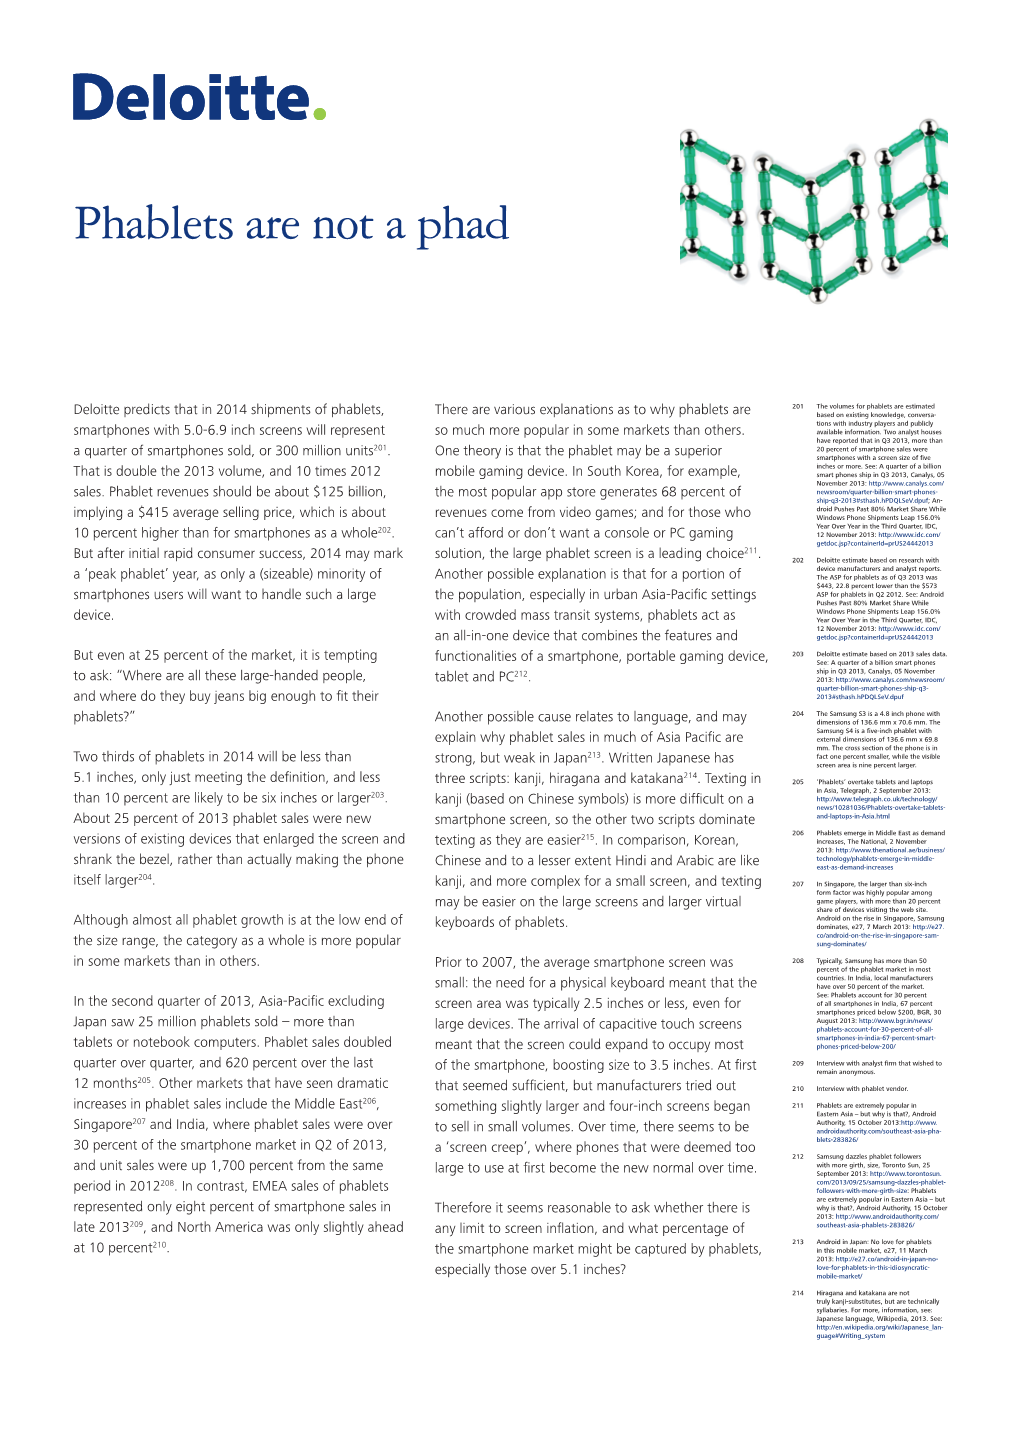 Phablets Are Not a Phad